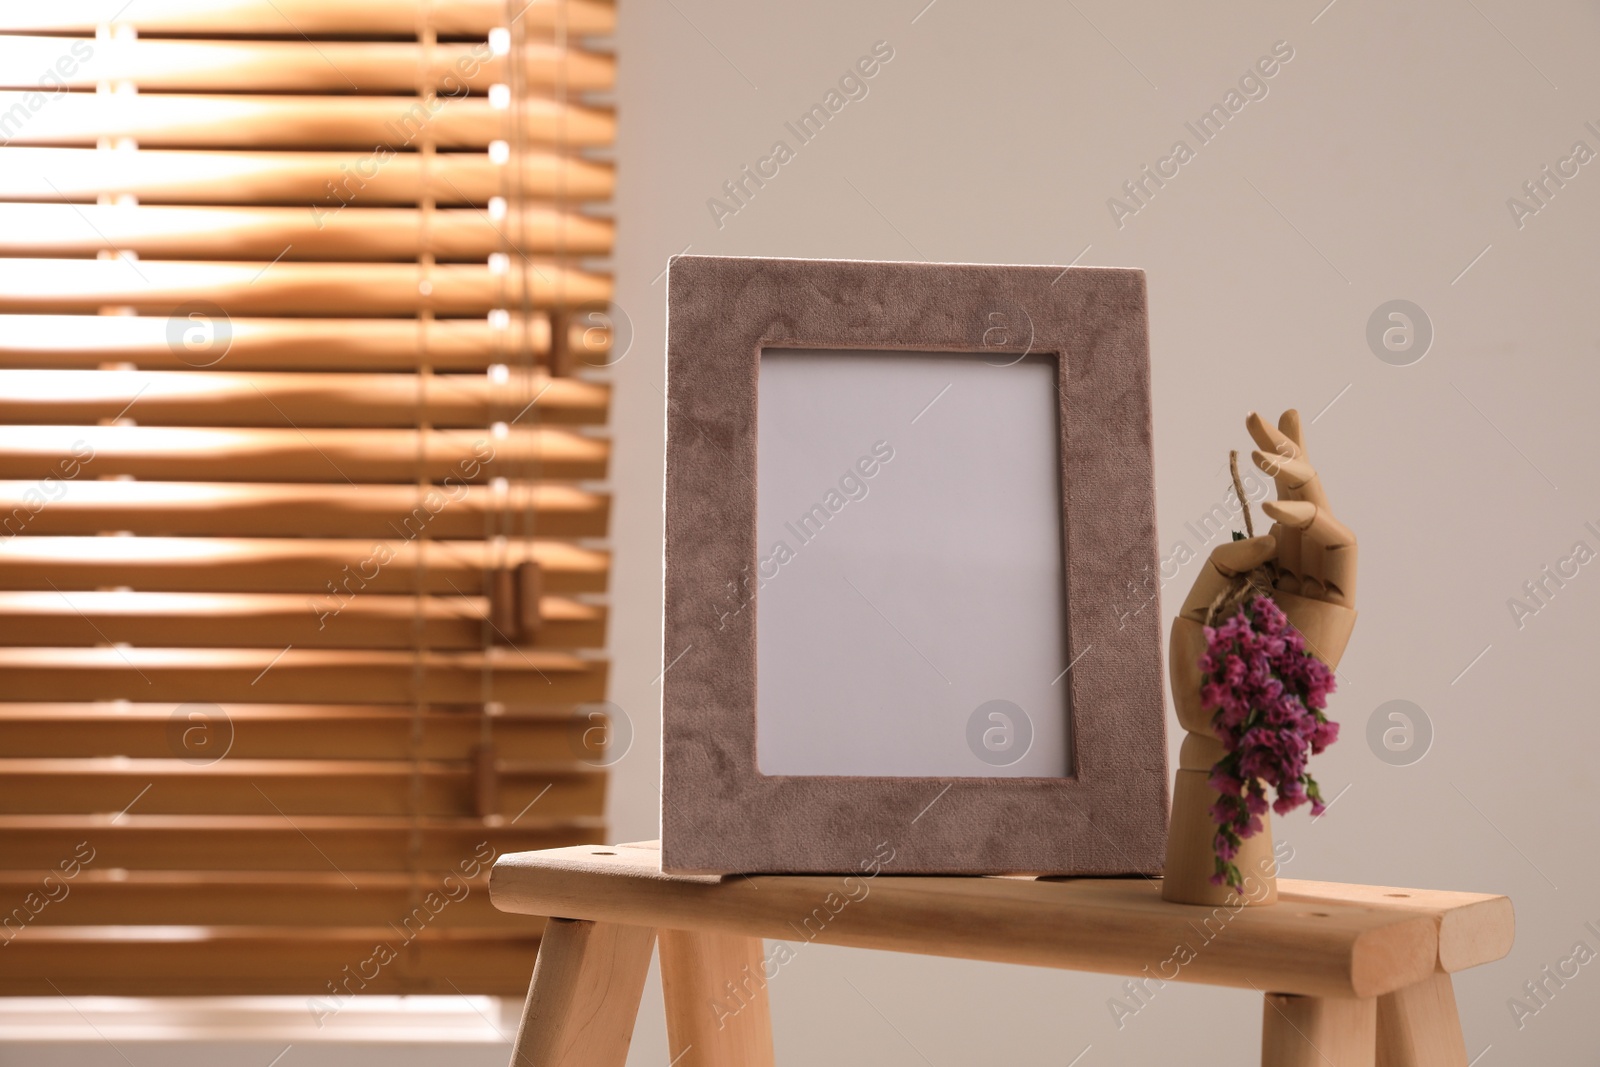 Photo of Empty photo frame and decorative hand with flowers on wooden table indoors, space for text